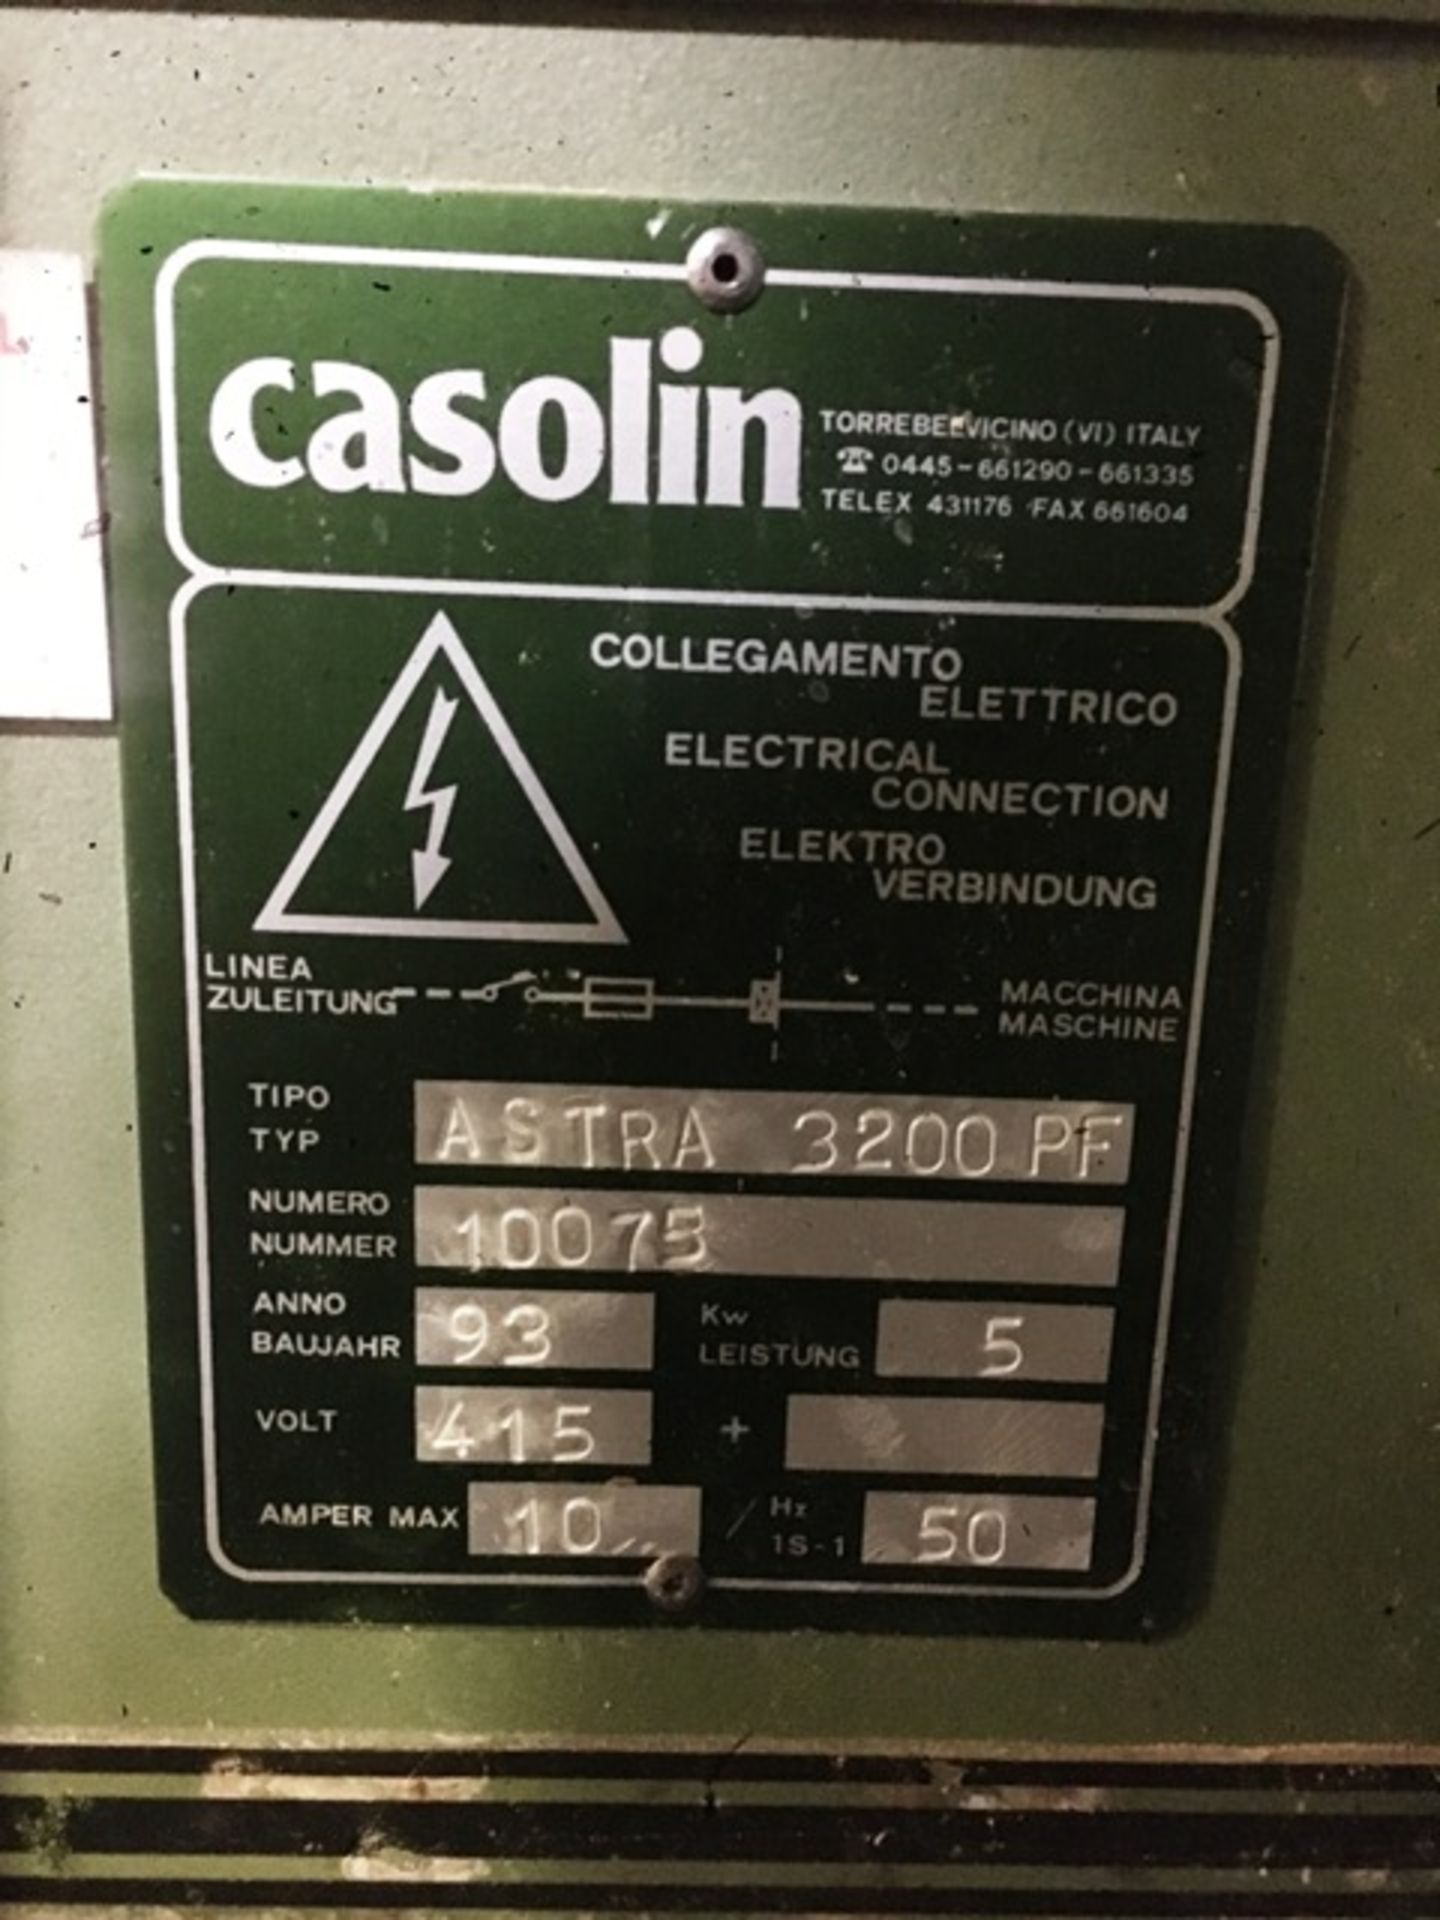 Casolin Astra 3200 PF panel saw, Serial No. 10075 (not currently commissioned / in use - all faults) - Image 4 of 4